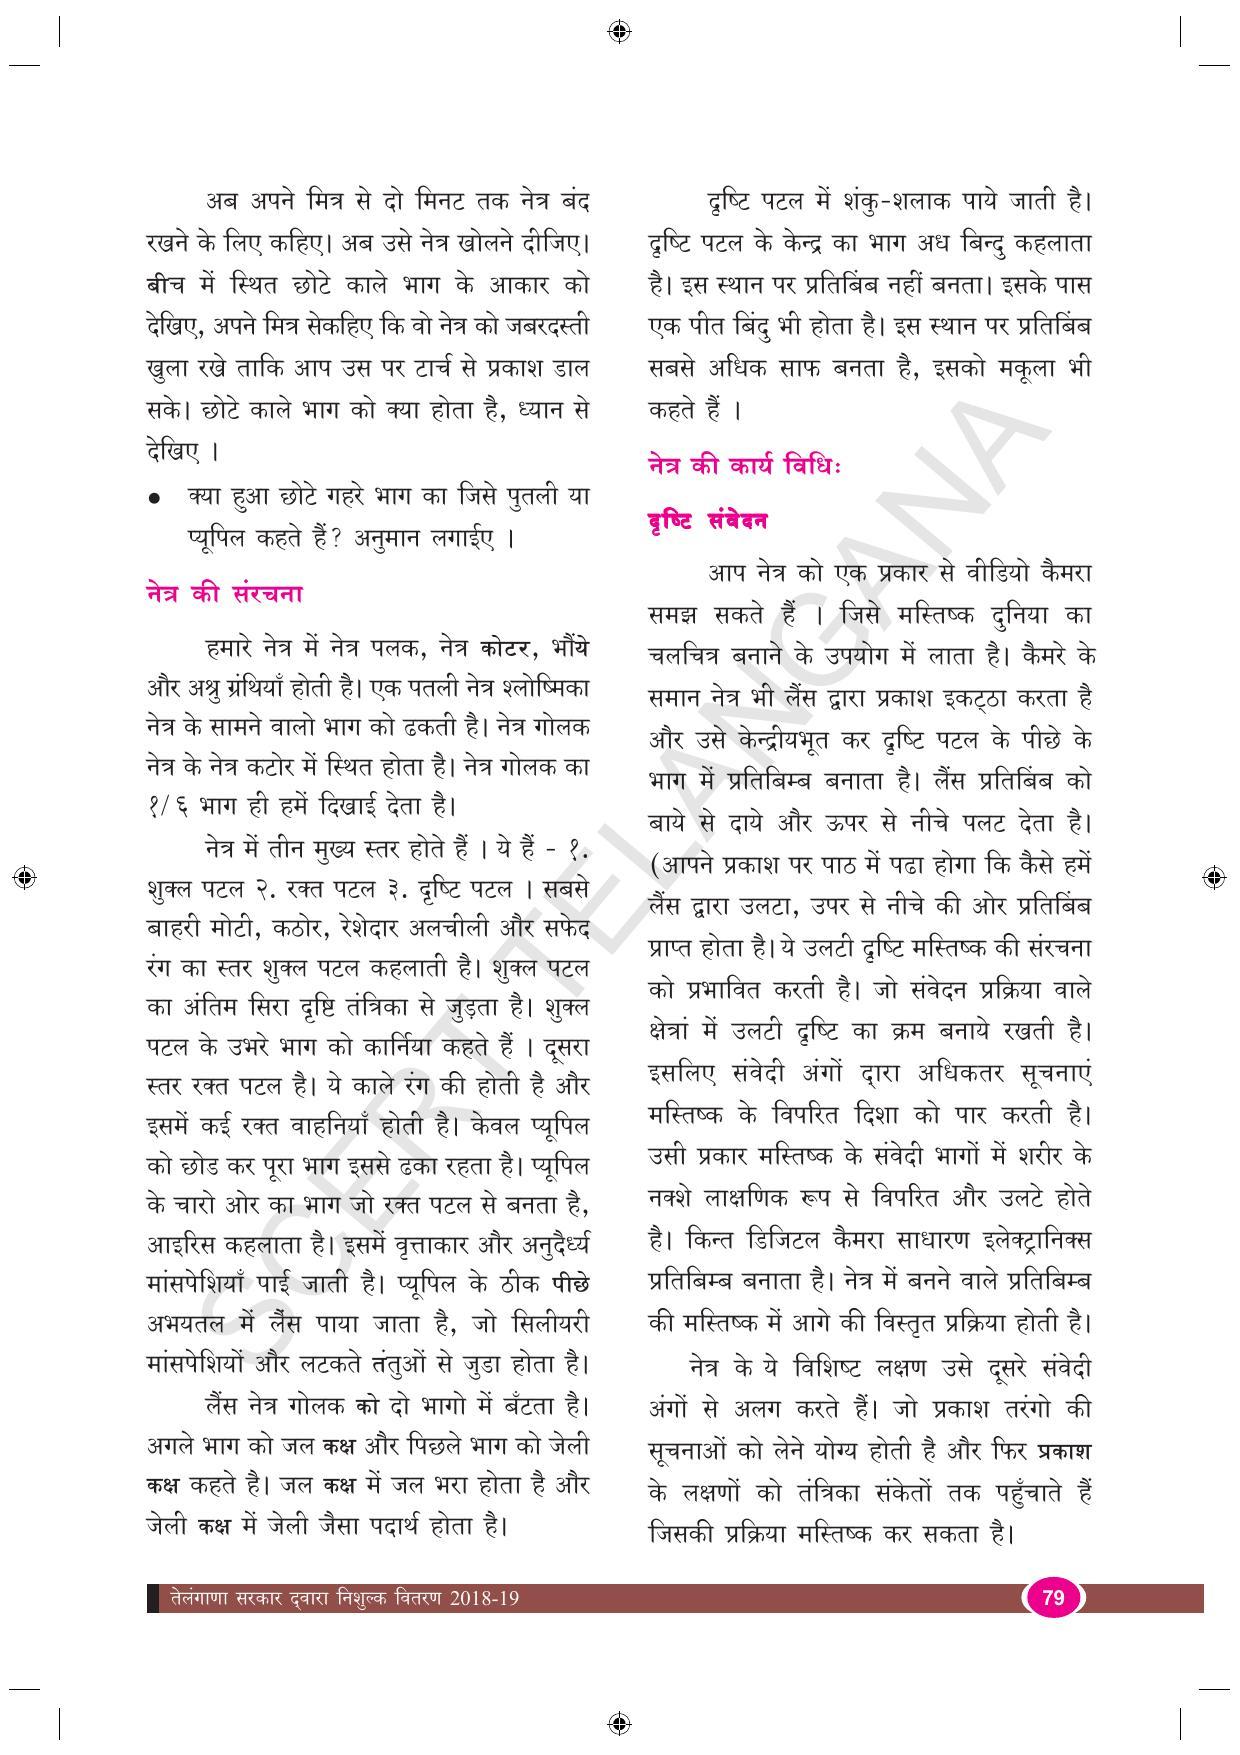 TS SCERT Class 9 Biological Science (Hindi Medium) Text Book - Page 91